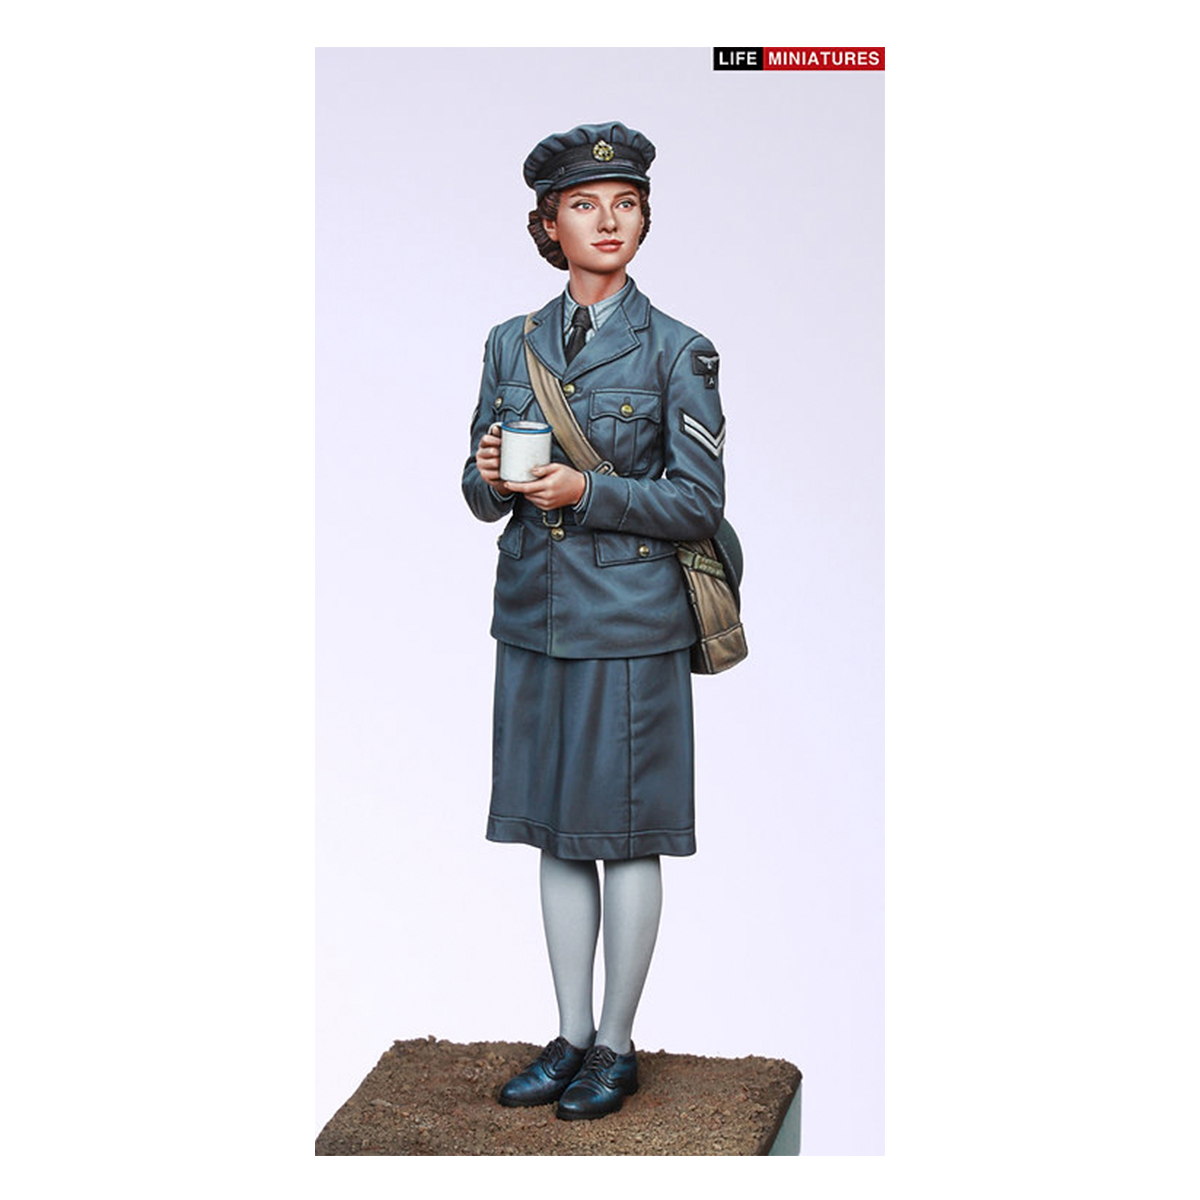 Life Miniatures – WAAF Assistant Section Leader 1940-1941 1/35